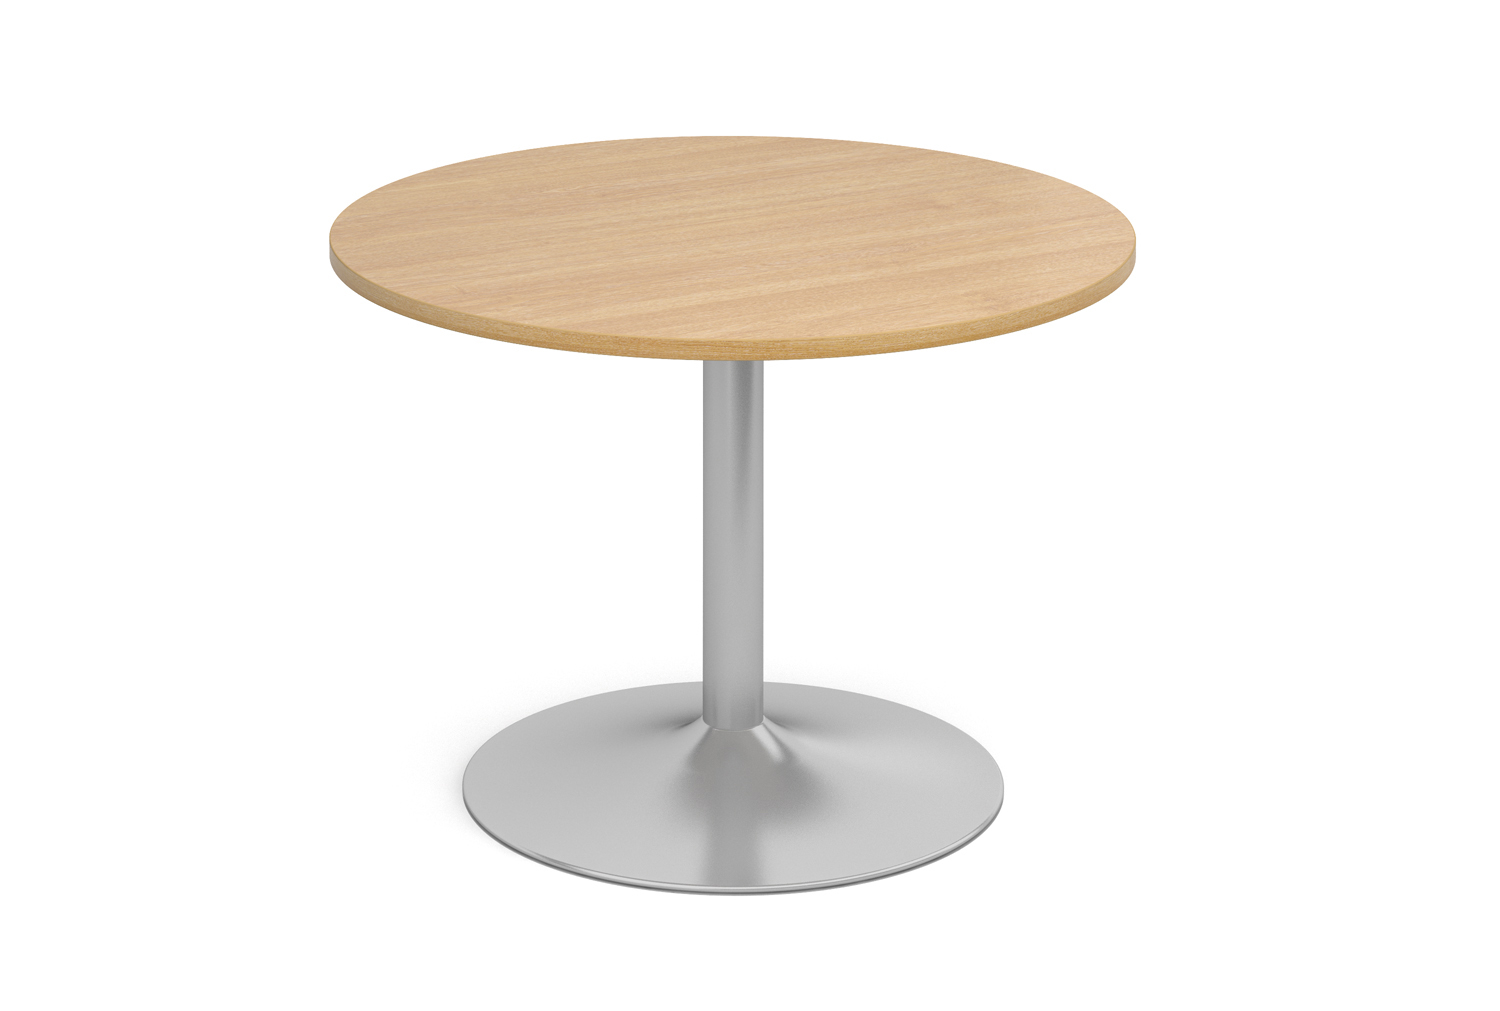 Trumpet Base Circular Boardroom Table, 120diax73h (cm), Chrome Frame, Oak, Express Delivery